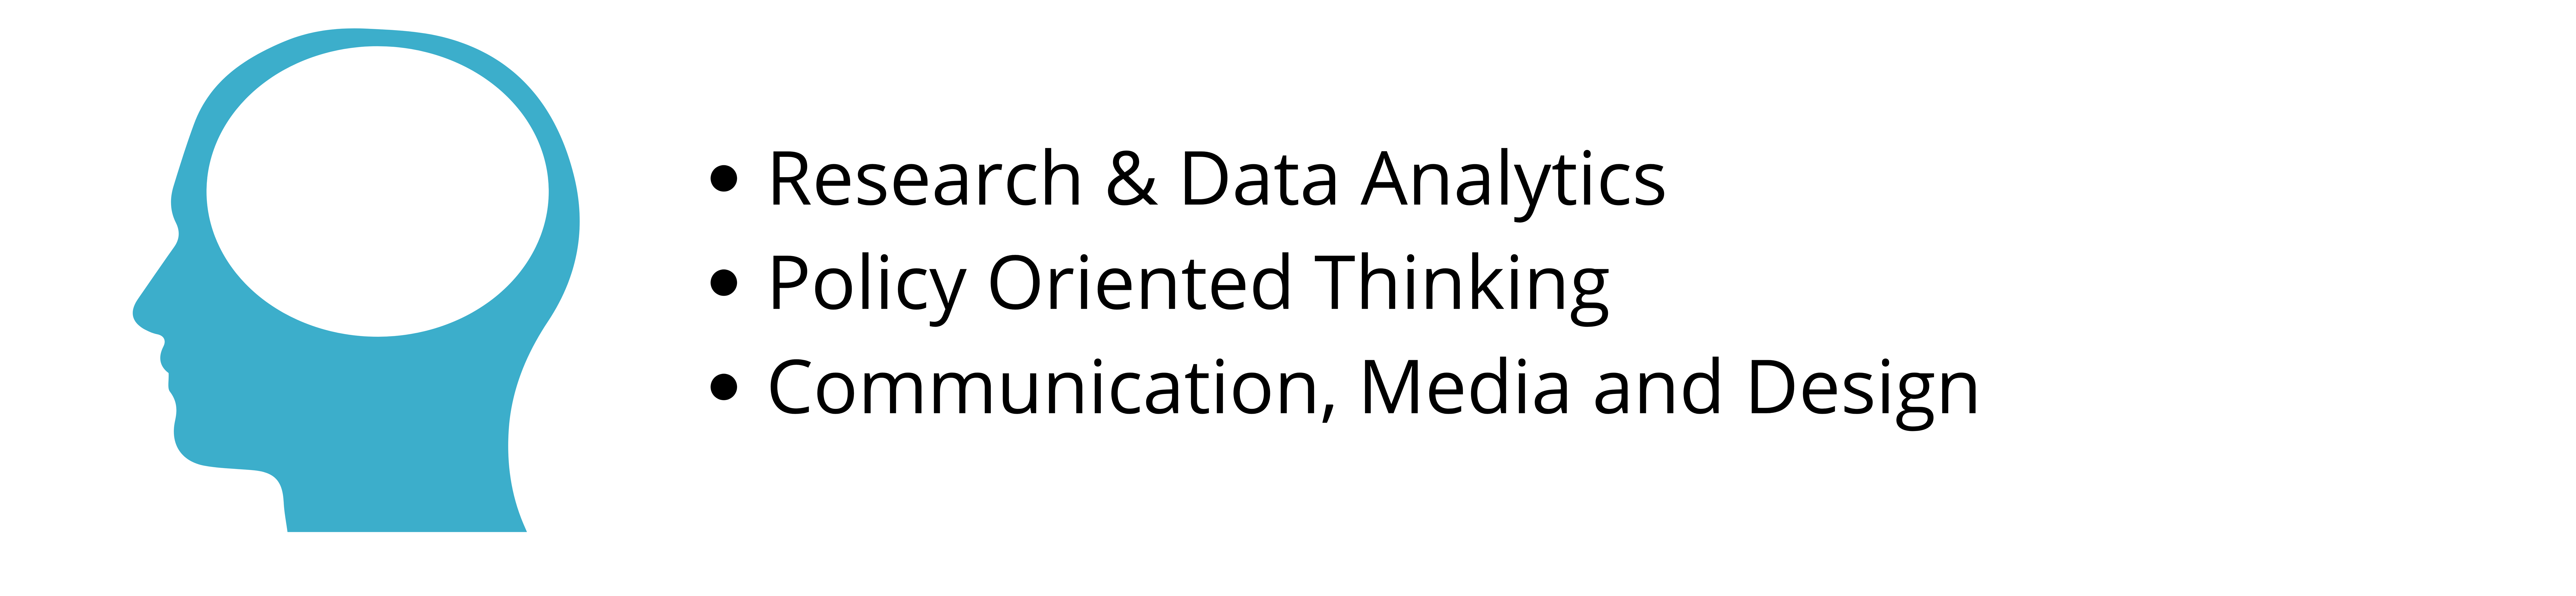 Research & Data Analytics Policy Oriented Thinking Communication, Media and Design